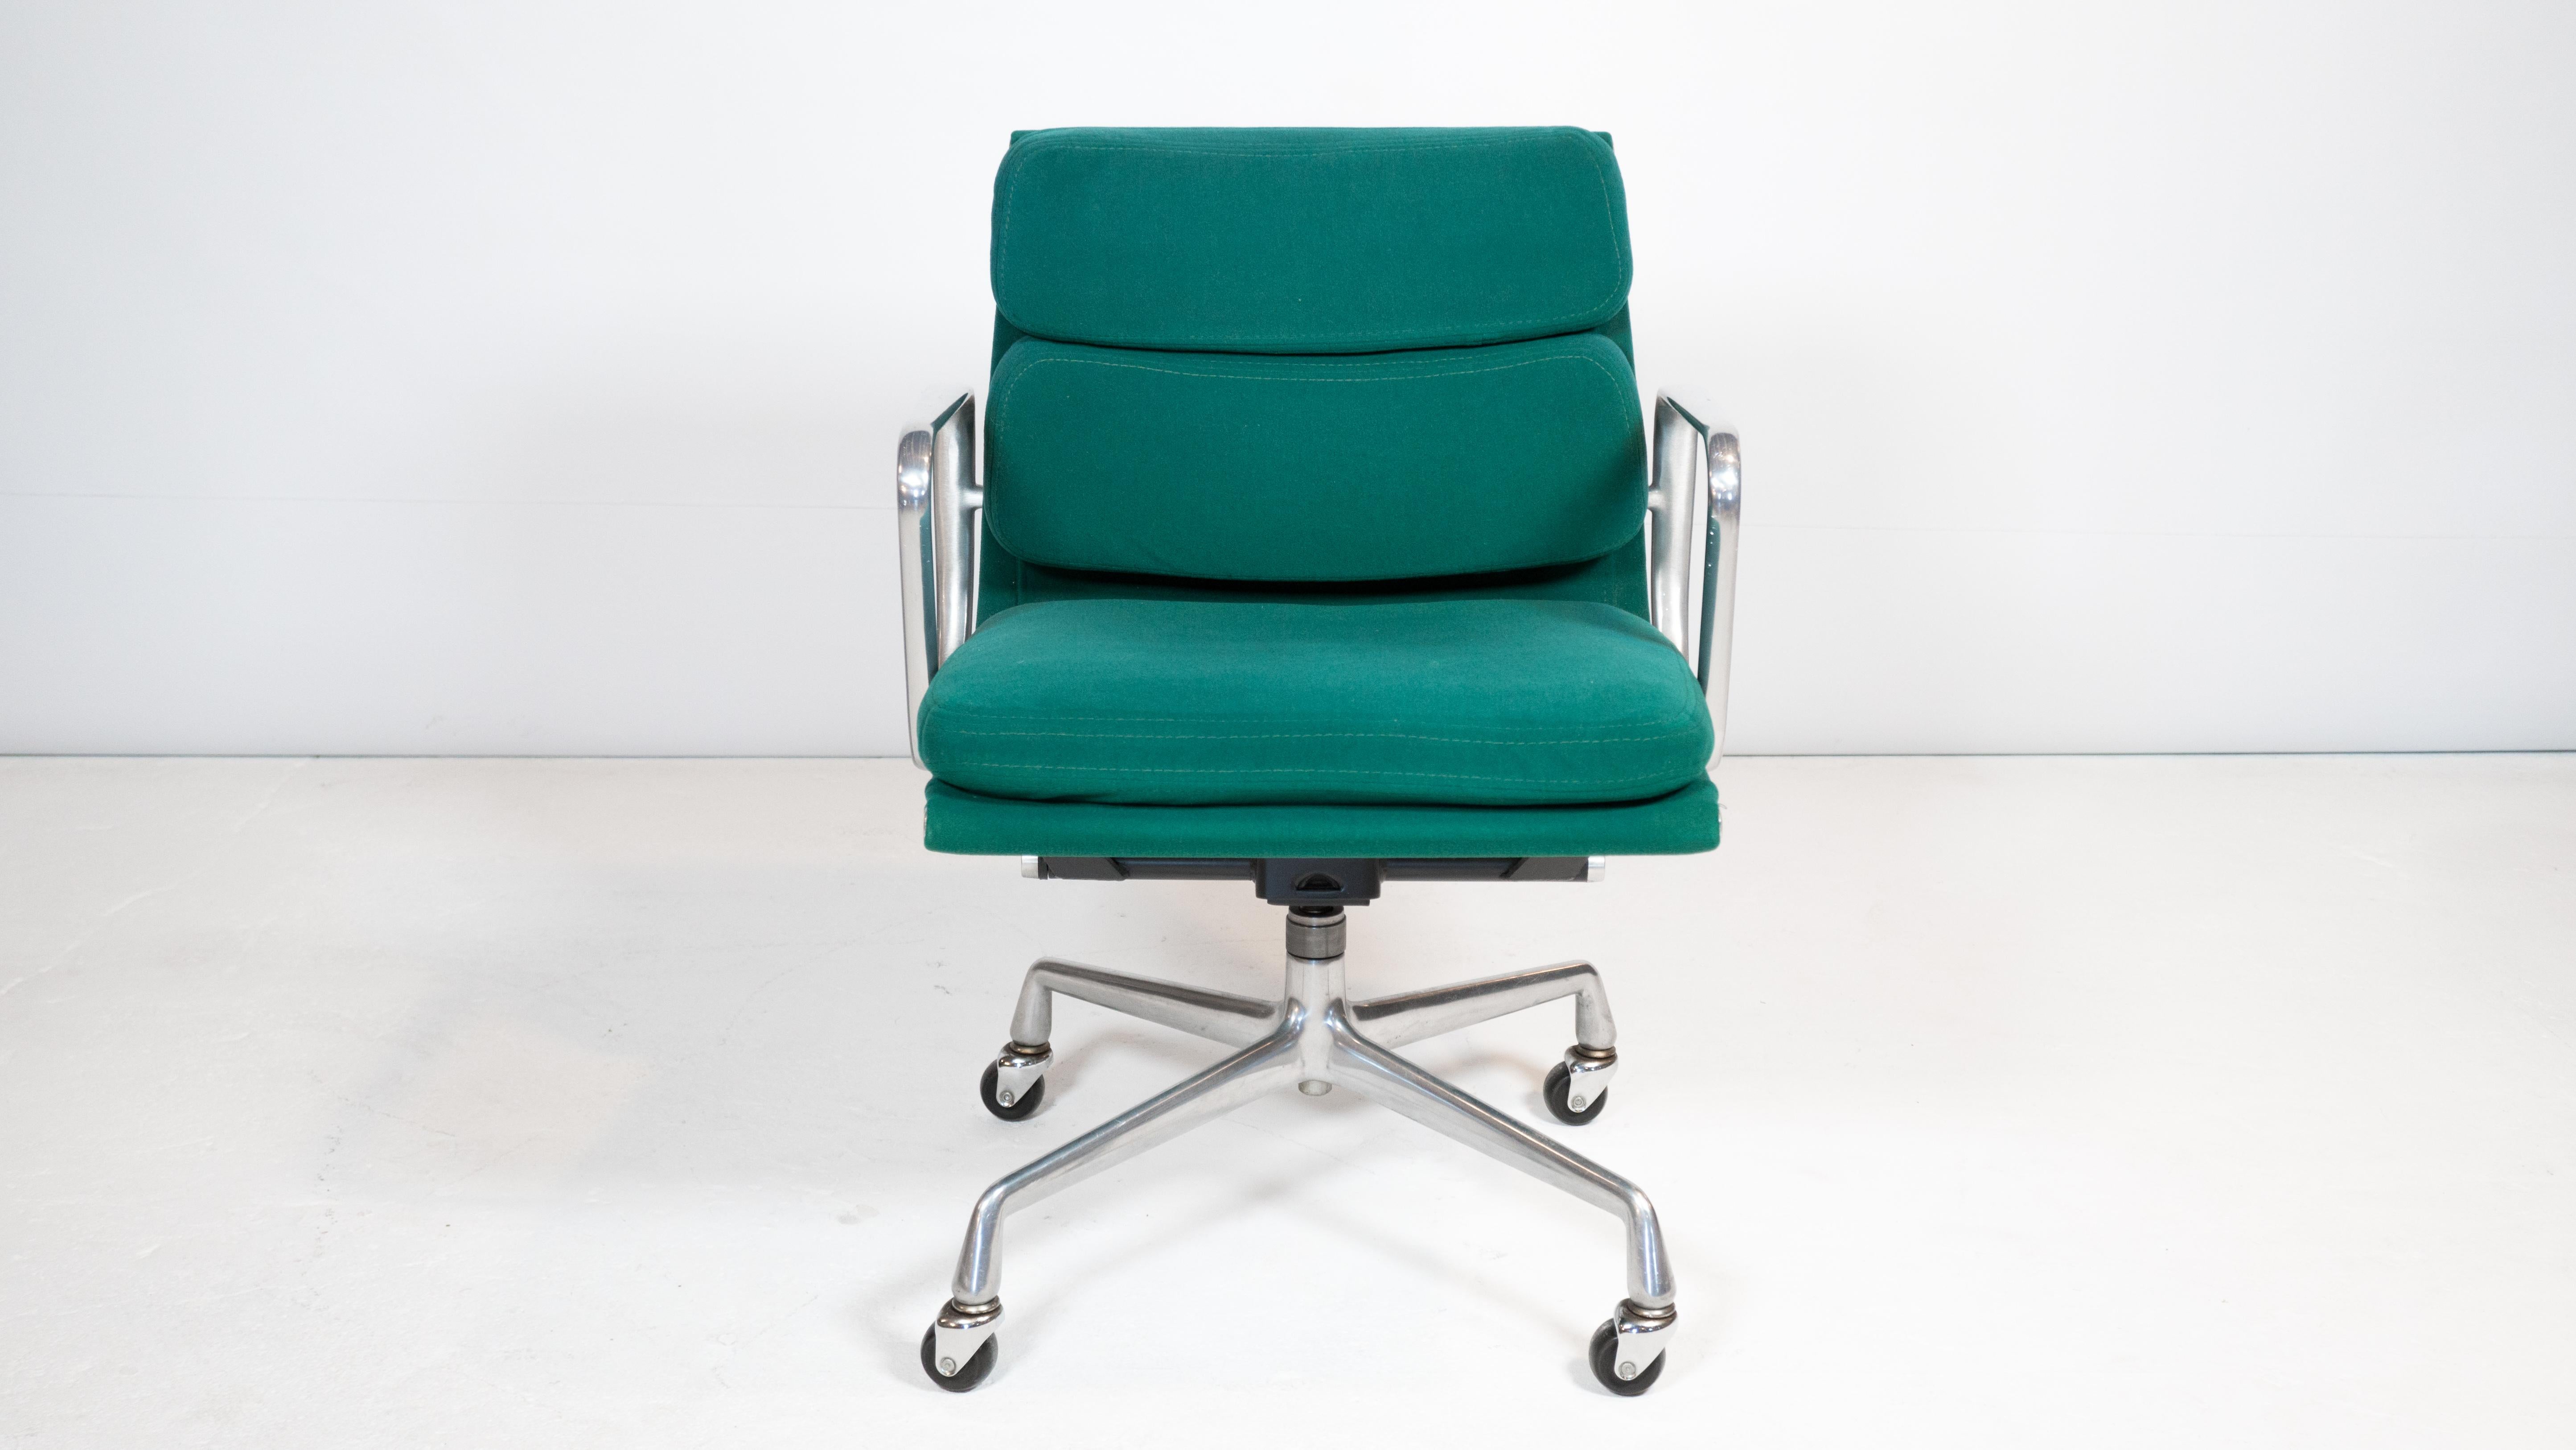 Eames Soft Pad Management chair by Charles and Ray Eames for Herman Miller circa 1983. Wrapped in the beautiful original soft turquoise fabric with plush padded seat and back cushions. Supported by a polished aluminum five-star caster base.